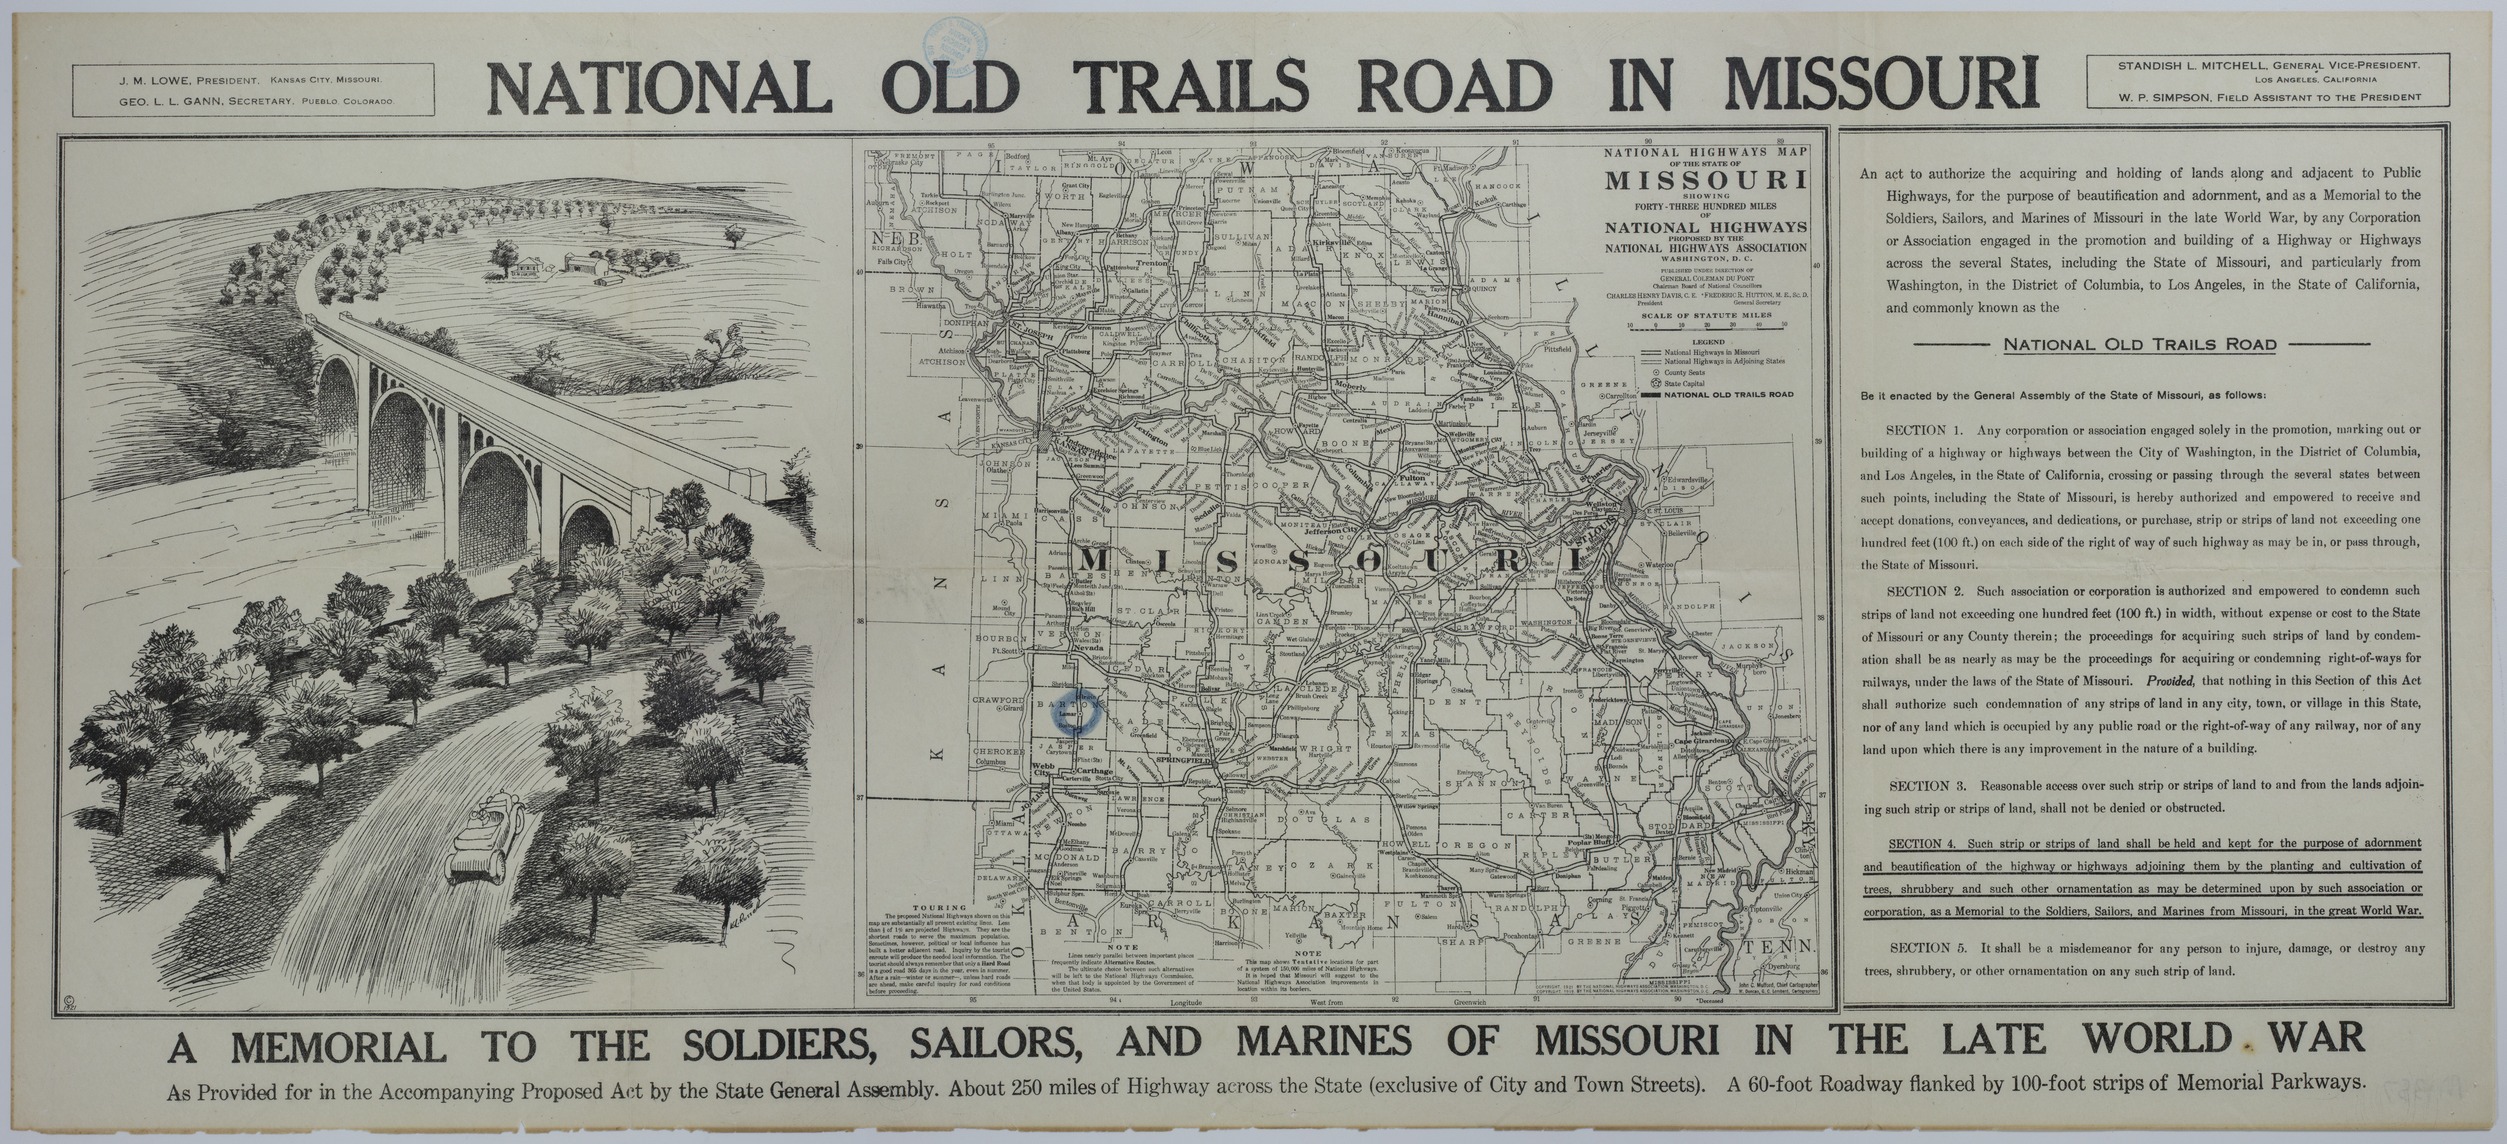 Map of the National Old Trails Road in Missouri